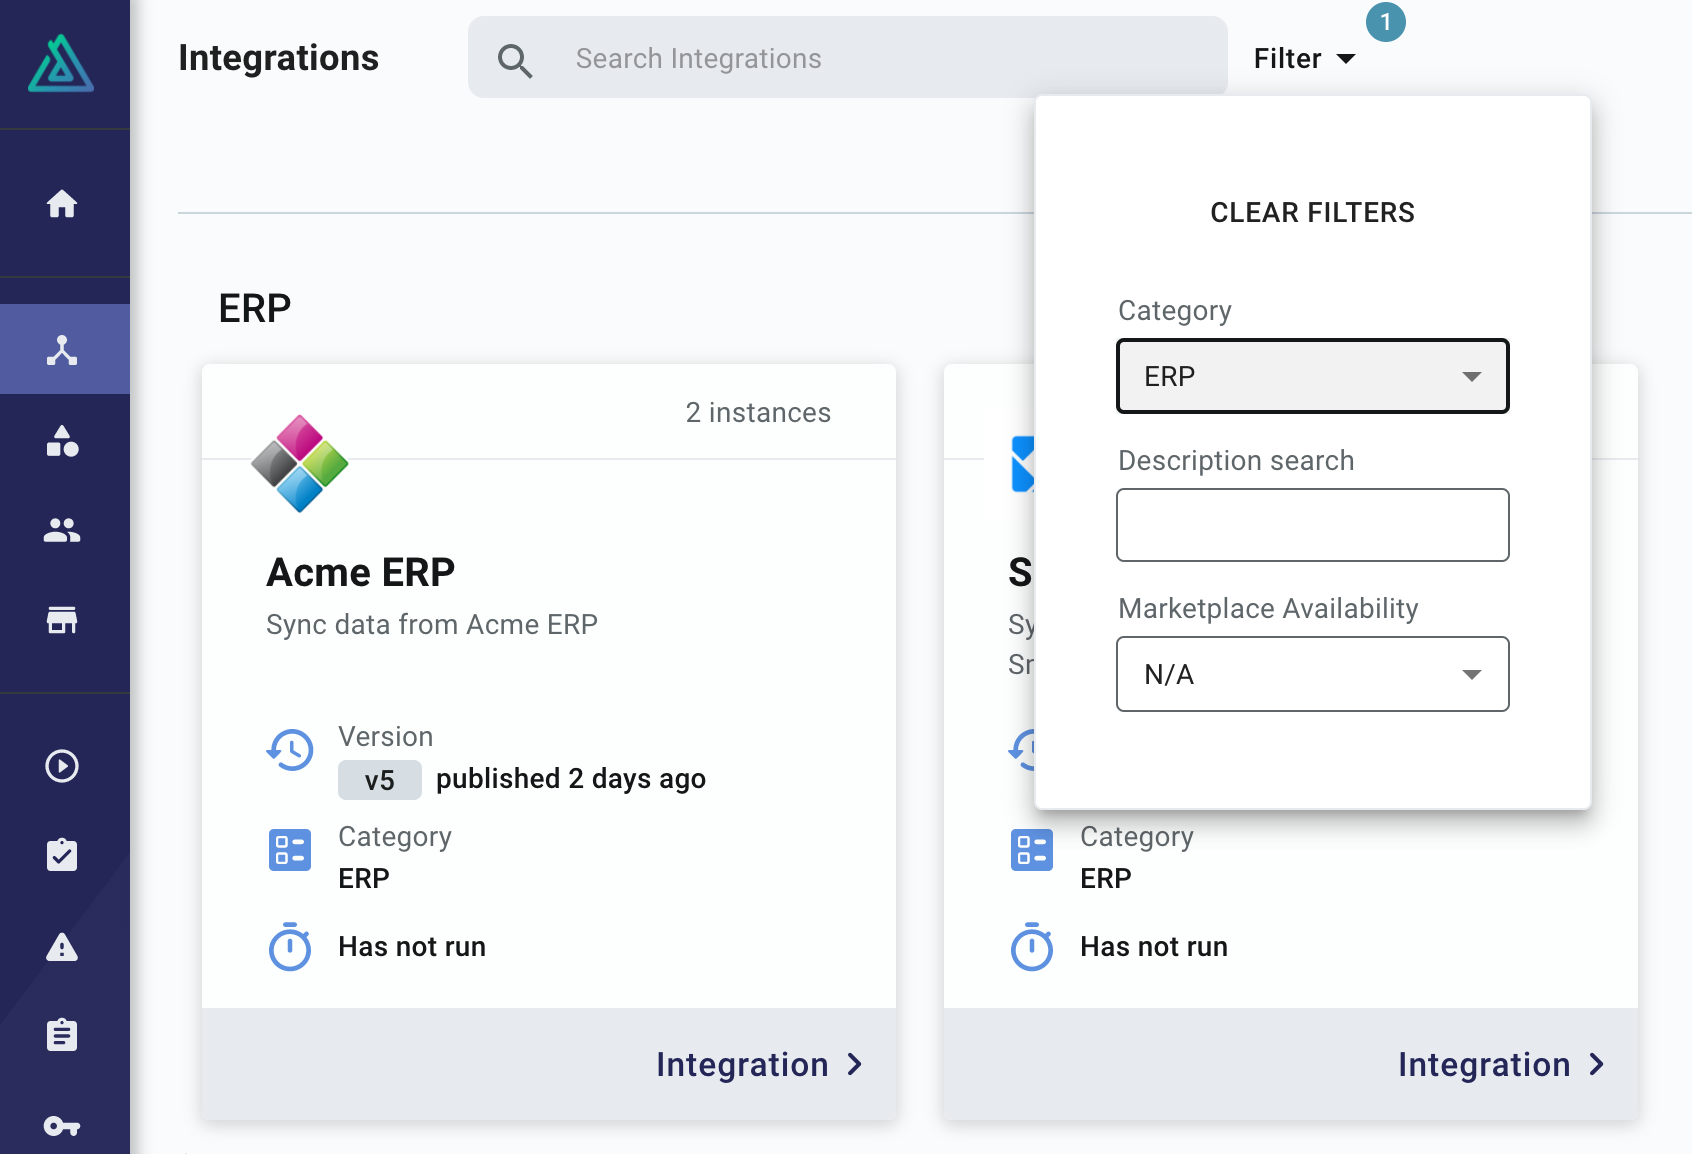 Filter integrations by category in Prismatic app